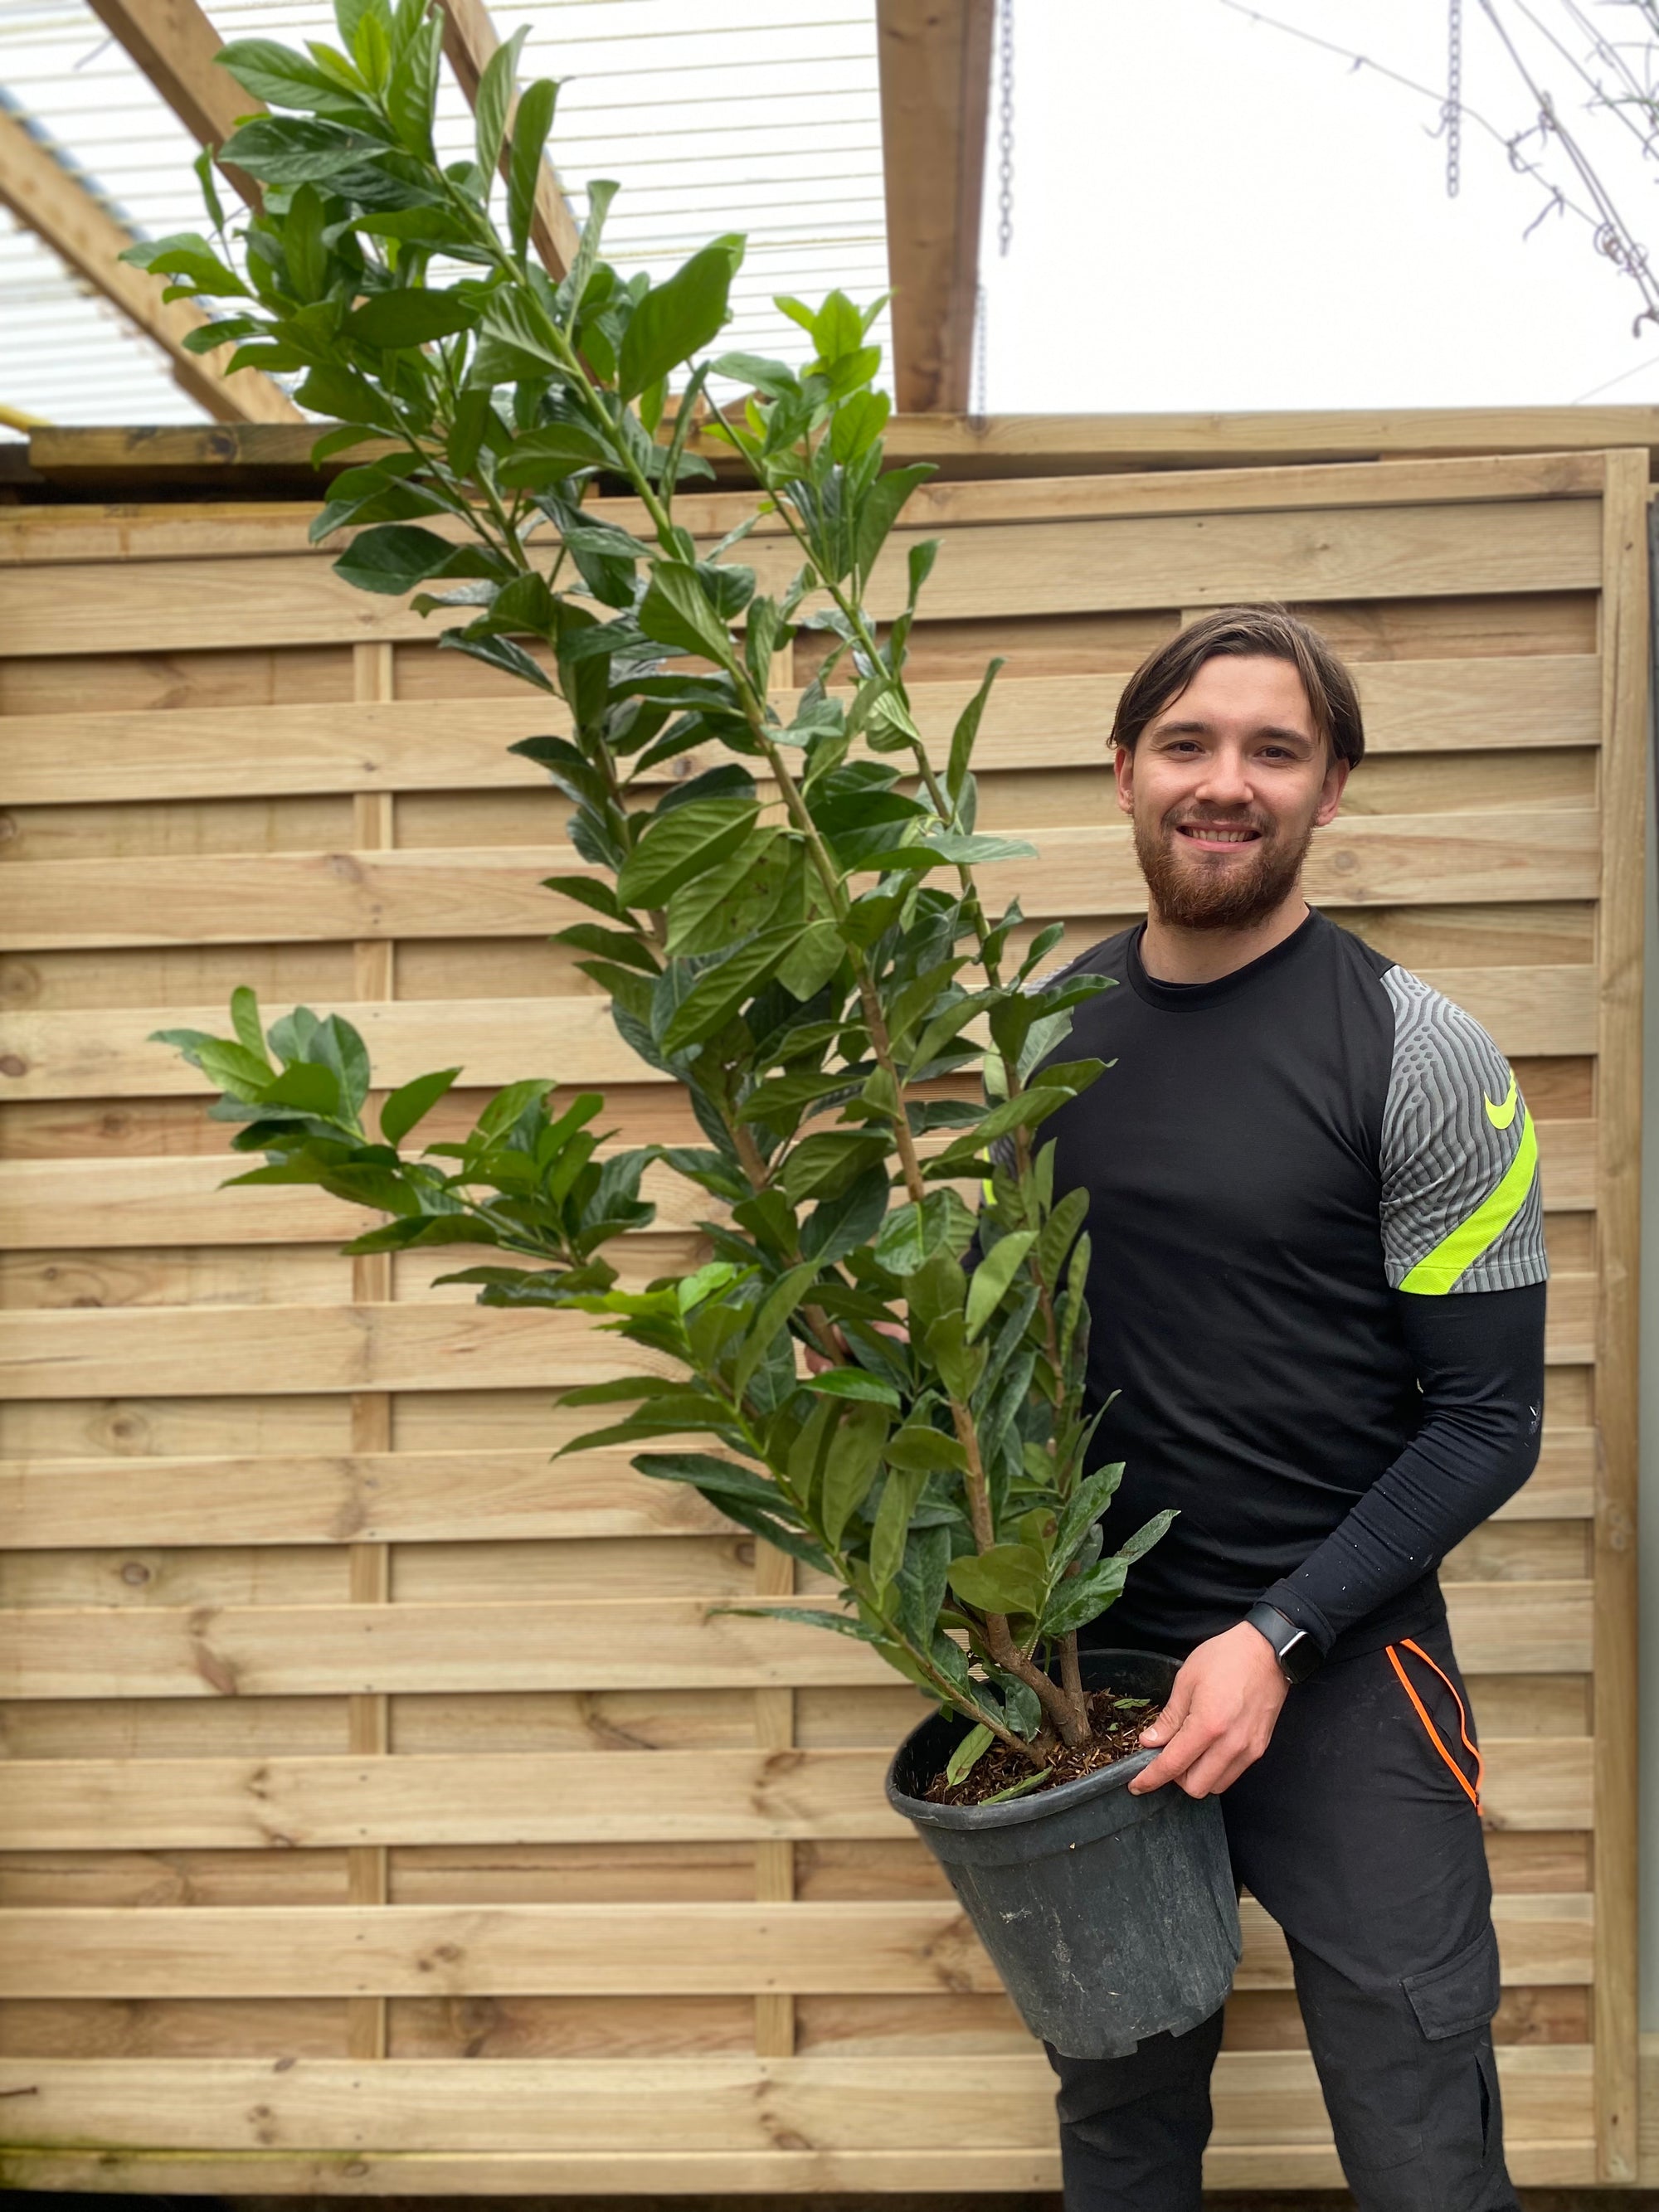 SPECIAL OFFER: 5-6ft Potted Cherry Laurel Hedge Plants 150-180cm (Multi-Buy Offers Available)